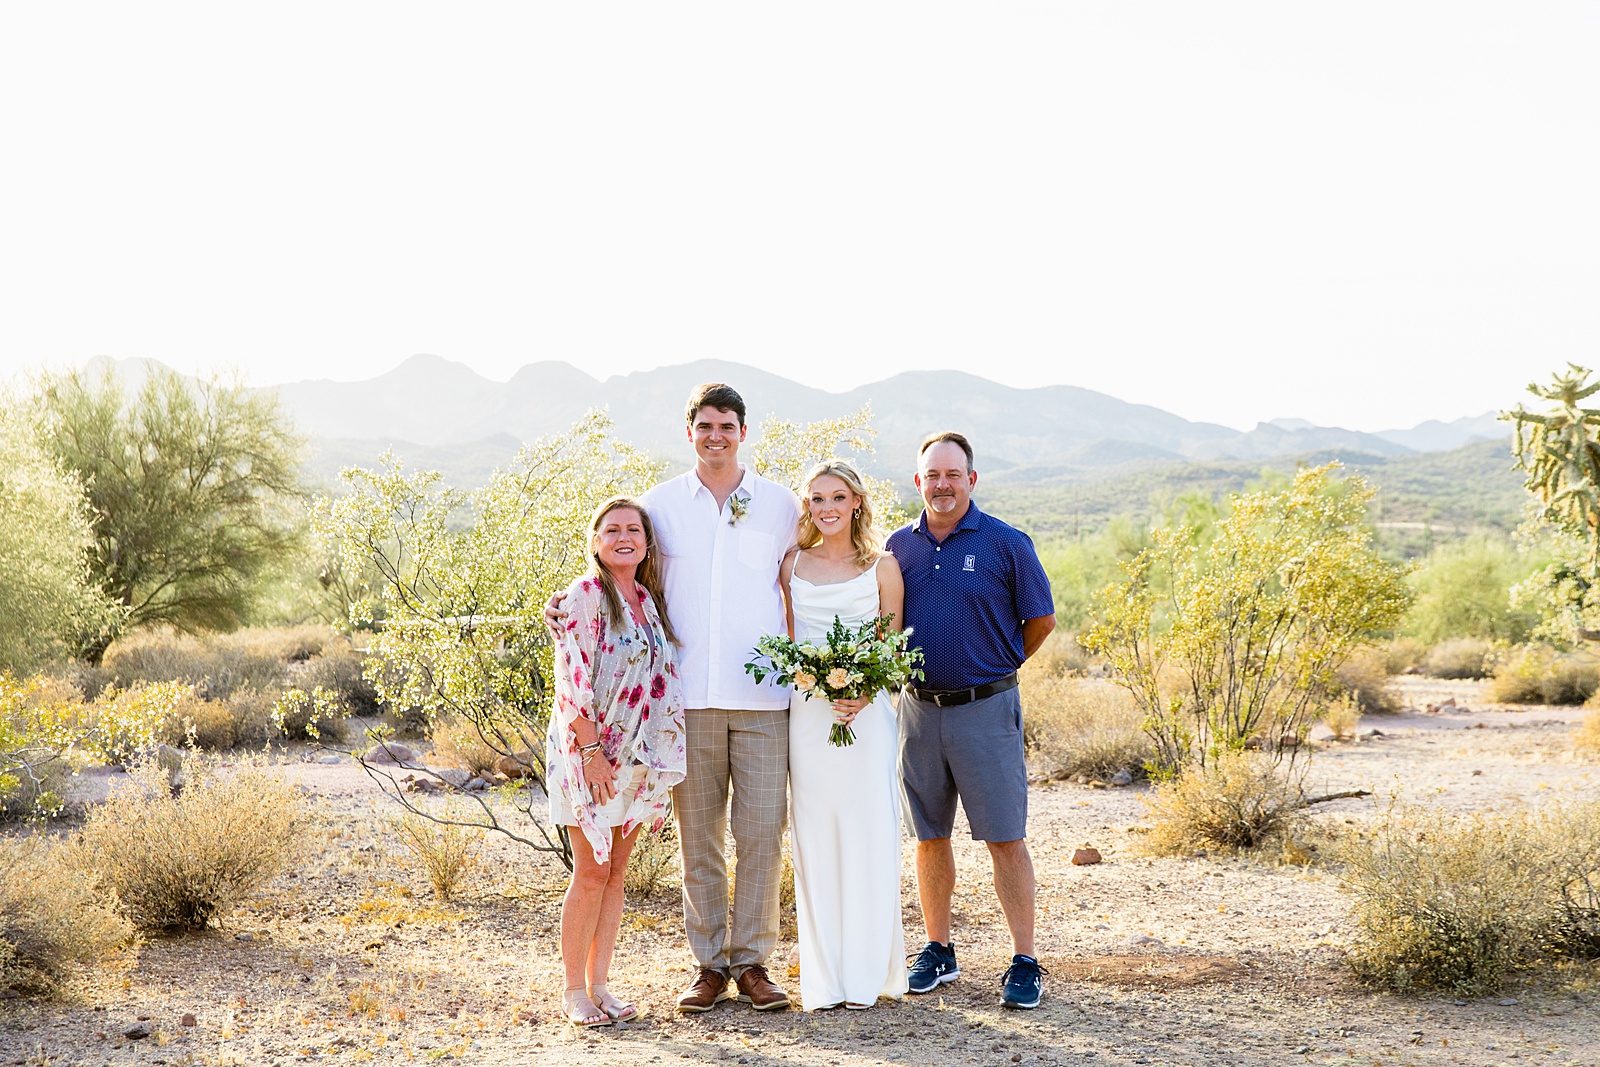 Bride and groom pose with family during their Superstition Mountain Micro wedding by Lost Dutchman wedding photographer PMA Photography.